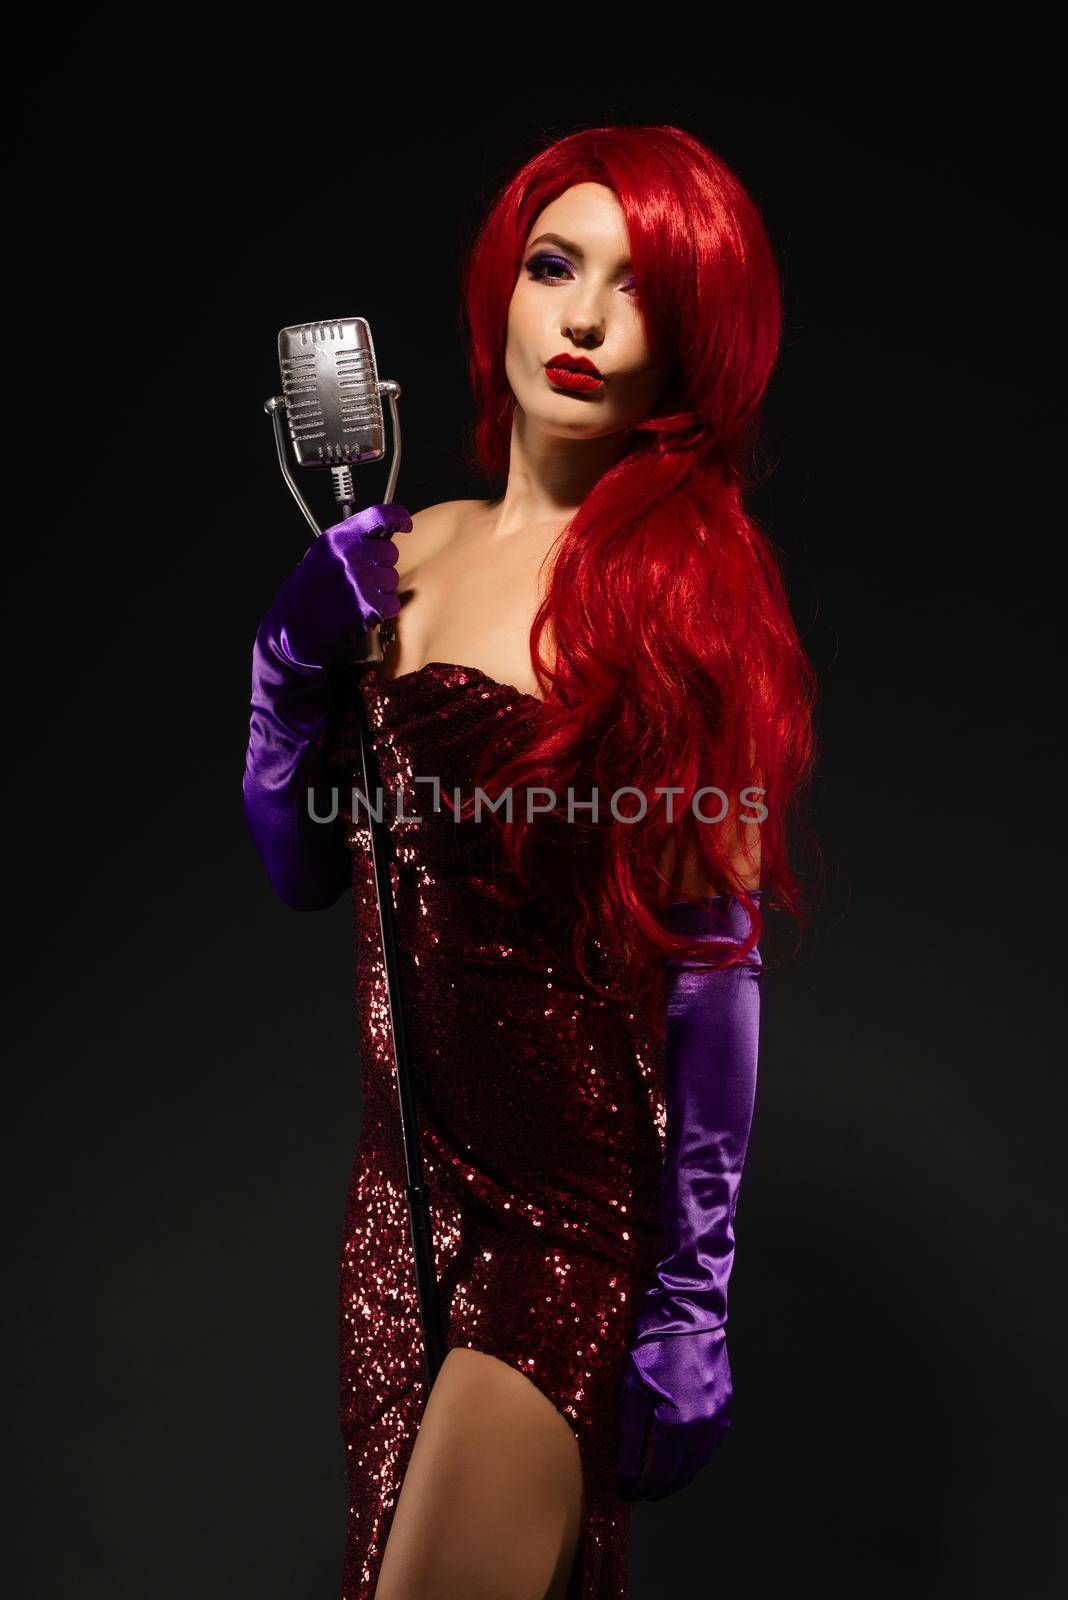 Young romantic redhead woman with very long hair in red dress with microphone on the stand licked lips in a kiss on a black background. by zartarn